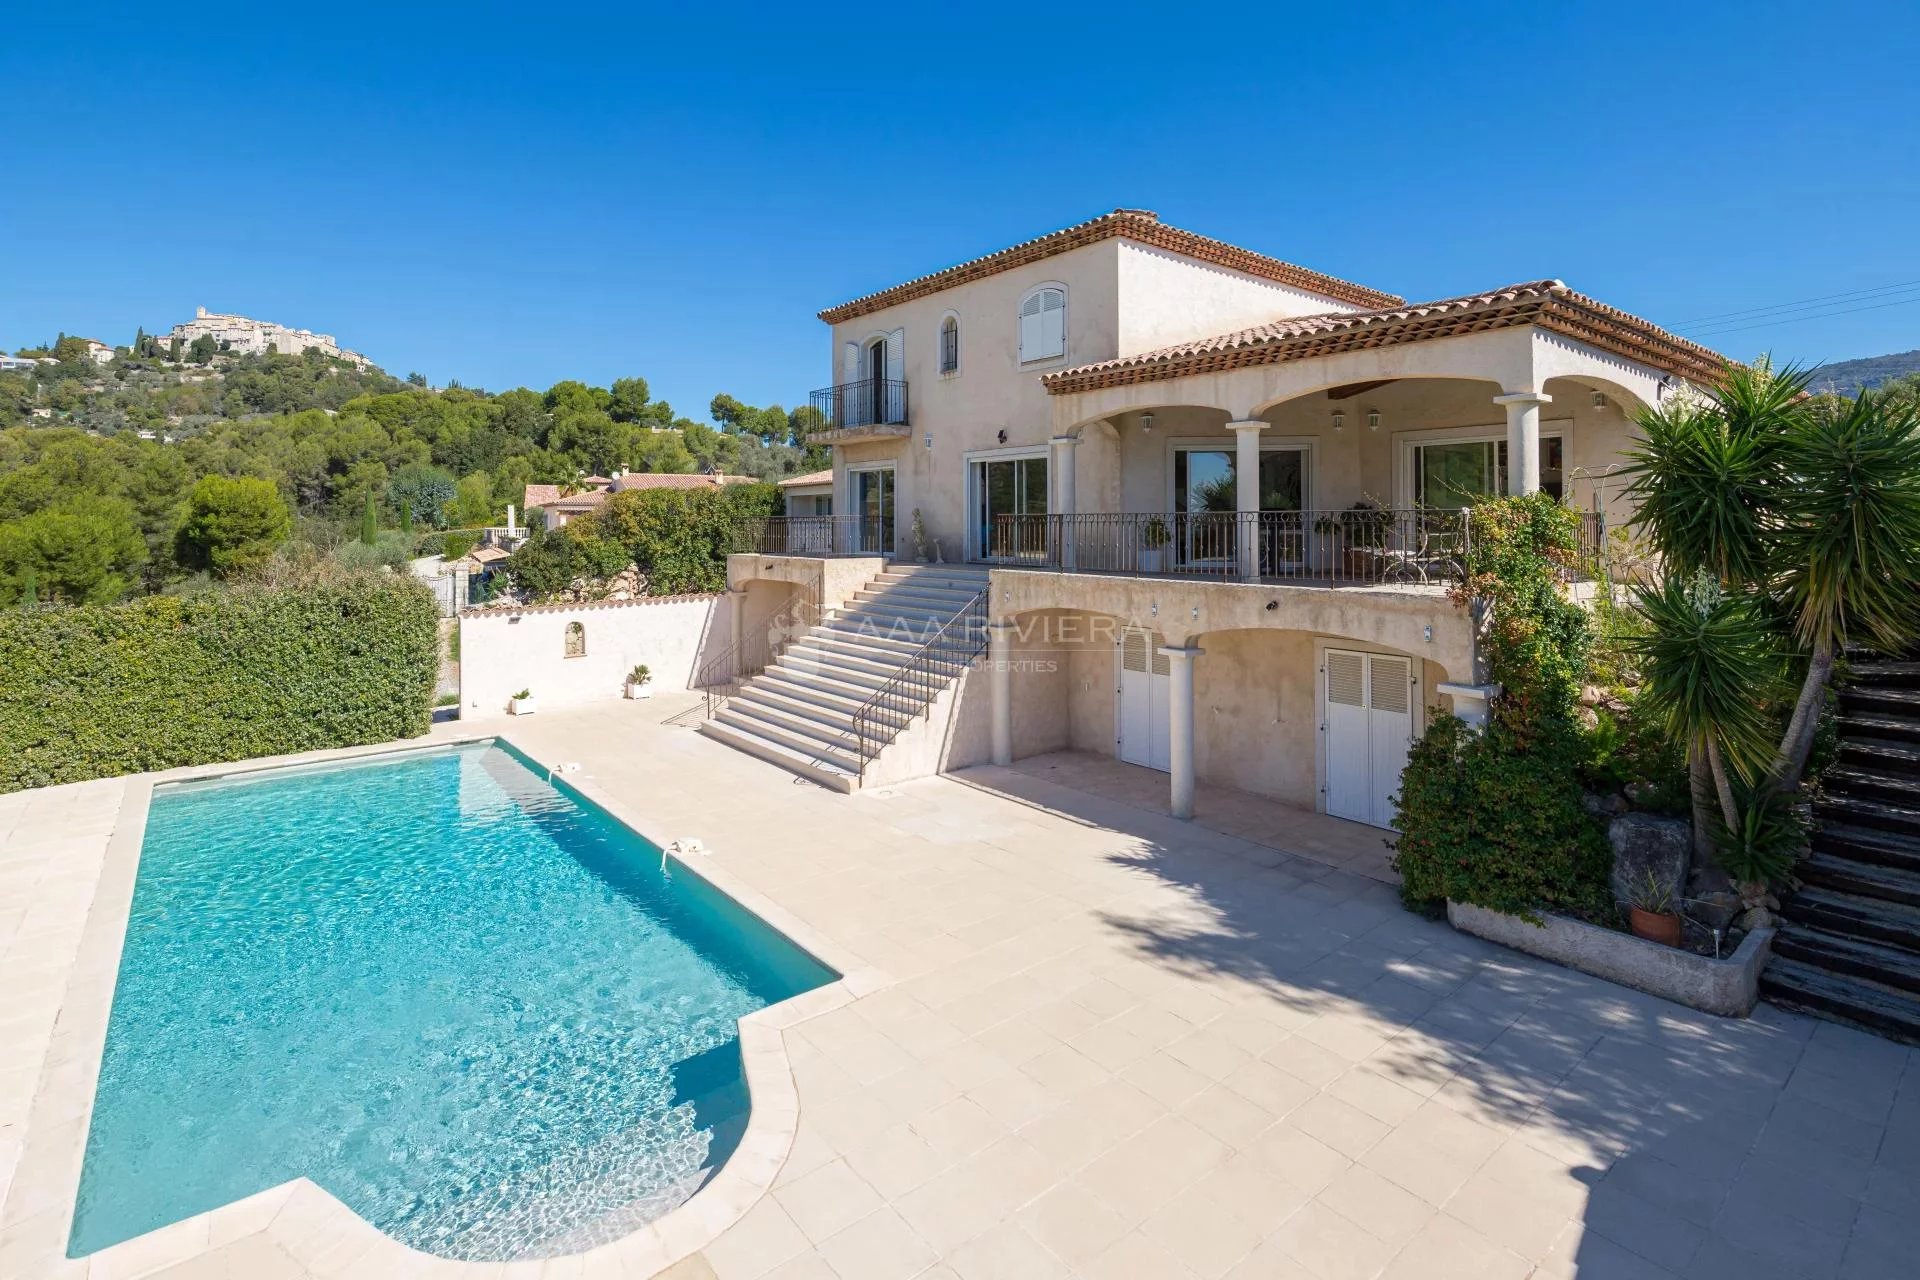 UNDER OFFER -Carros - Family villa of 5 bedroom with swimming pool and beautiful panoramic view in a residential and green area